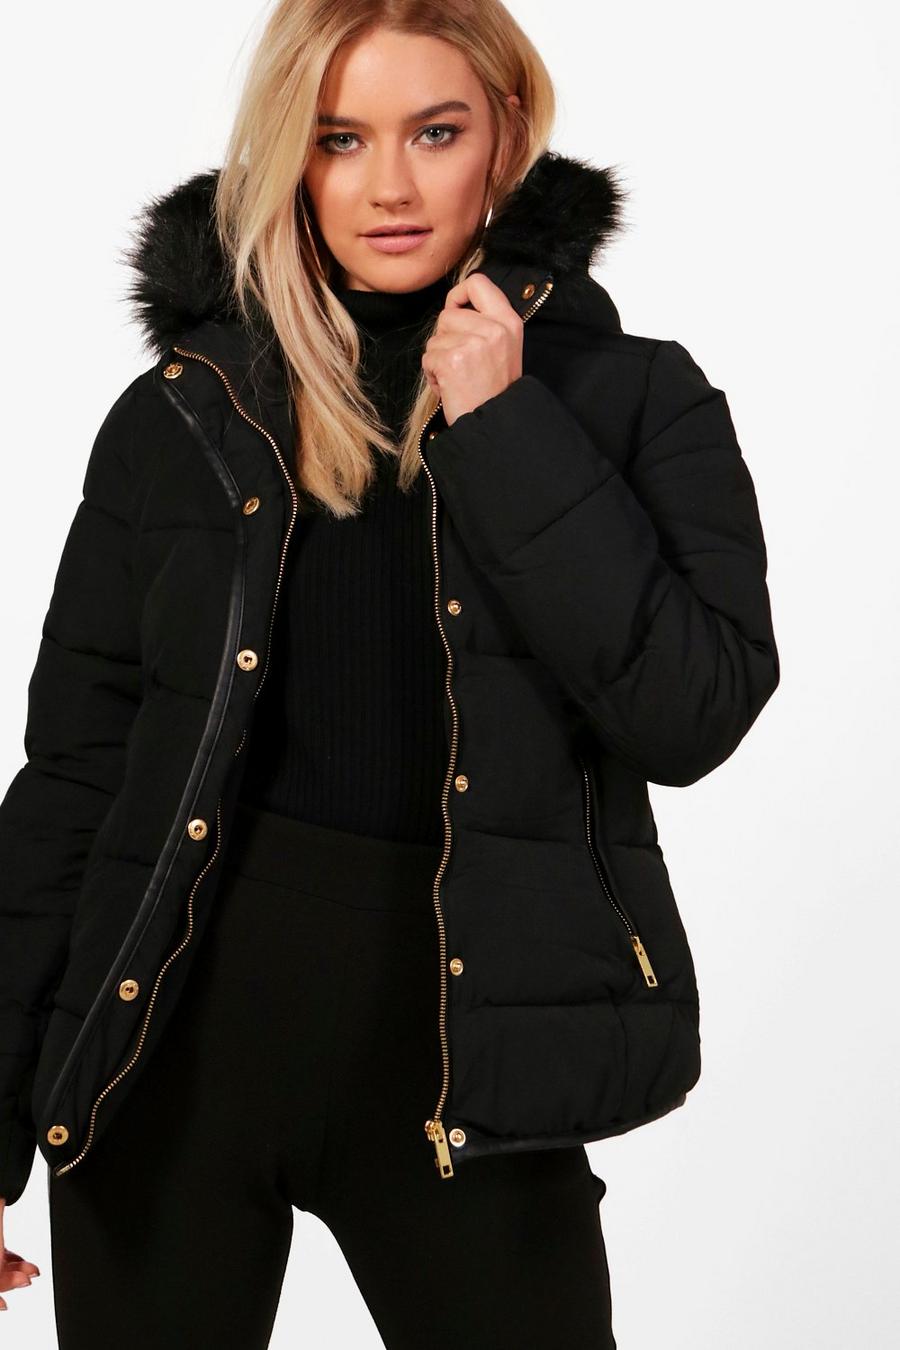 Fitted Puffer Jacket With Fur Hood Top Sellers | bellvalefarms.com